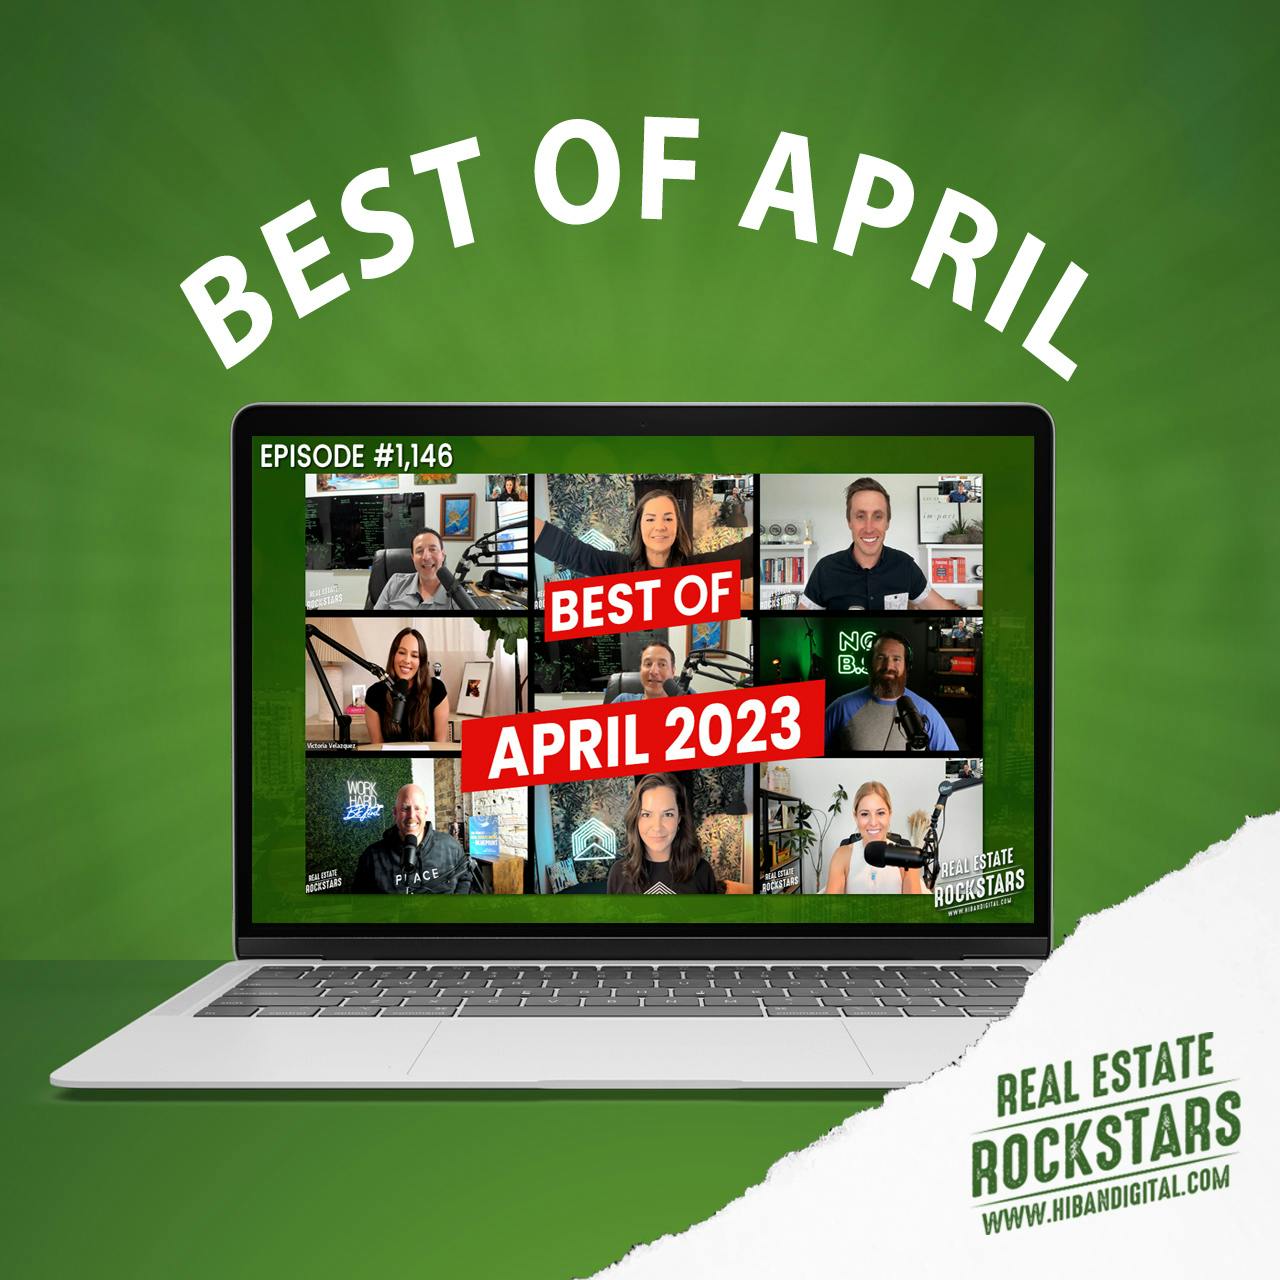 1146: RERR Highlights – The Best Real Estate Podcast Clips of April 2023